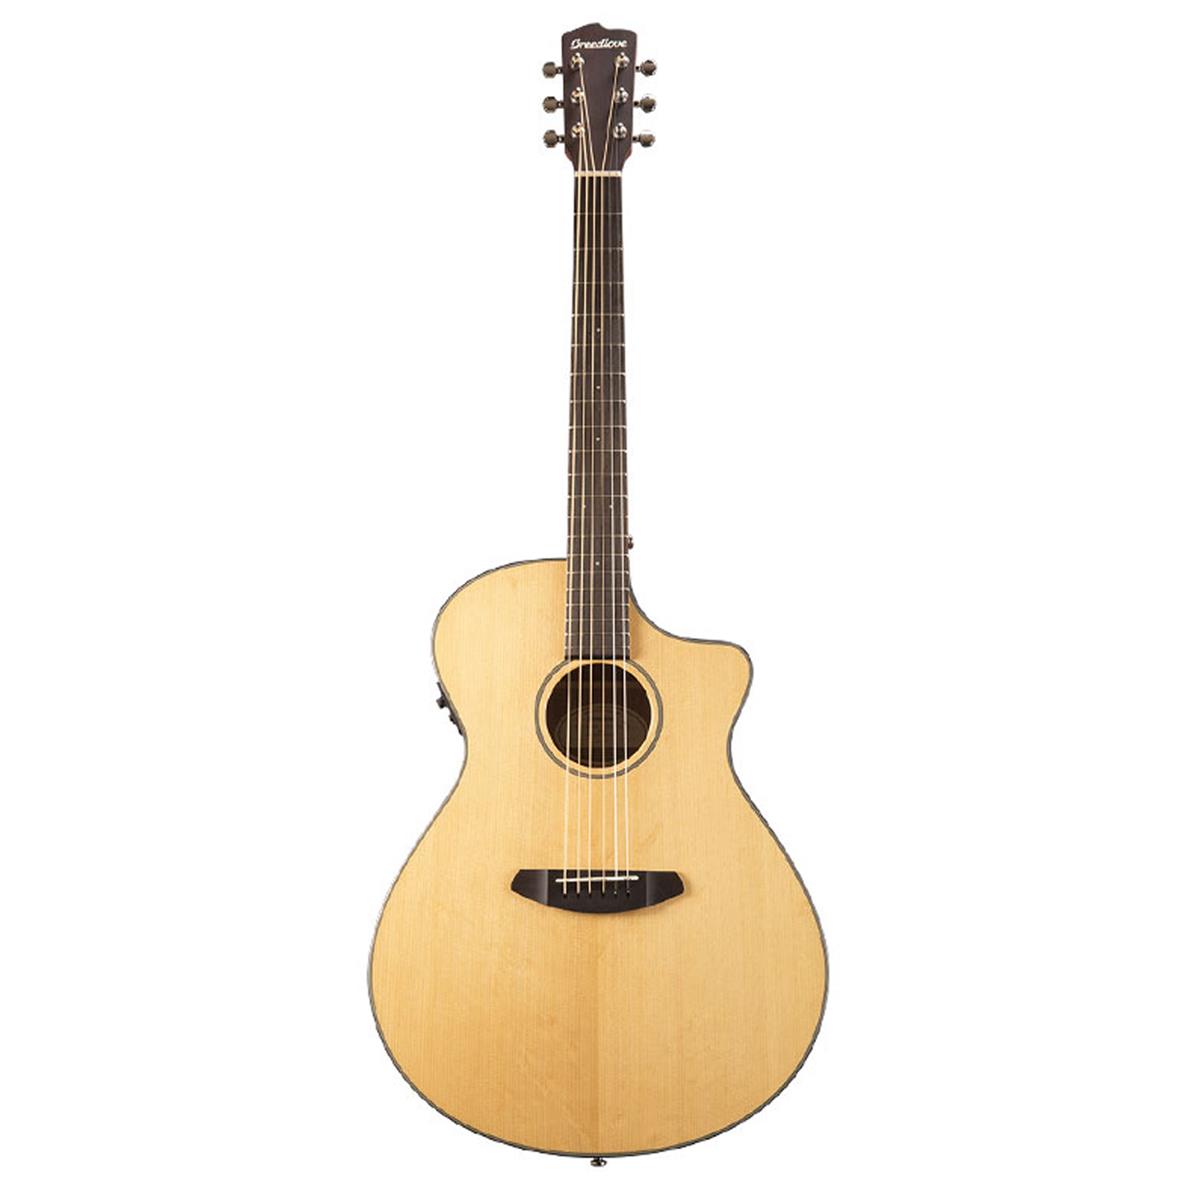 Image of Breedlove Discovery Concerto Sunburst CE Sitka Acoustic Electric Guitar